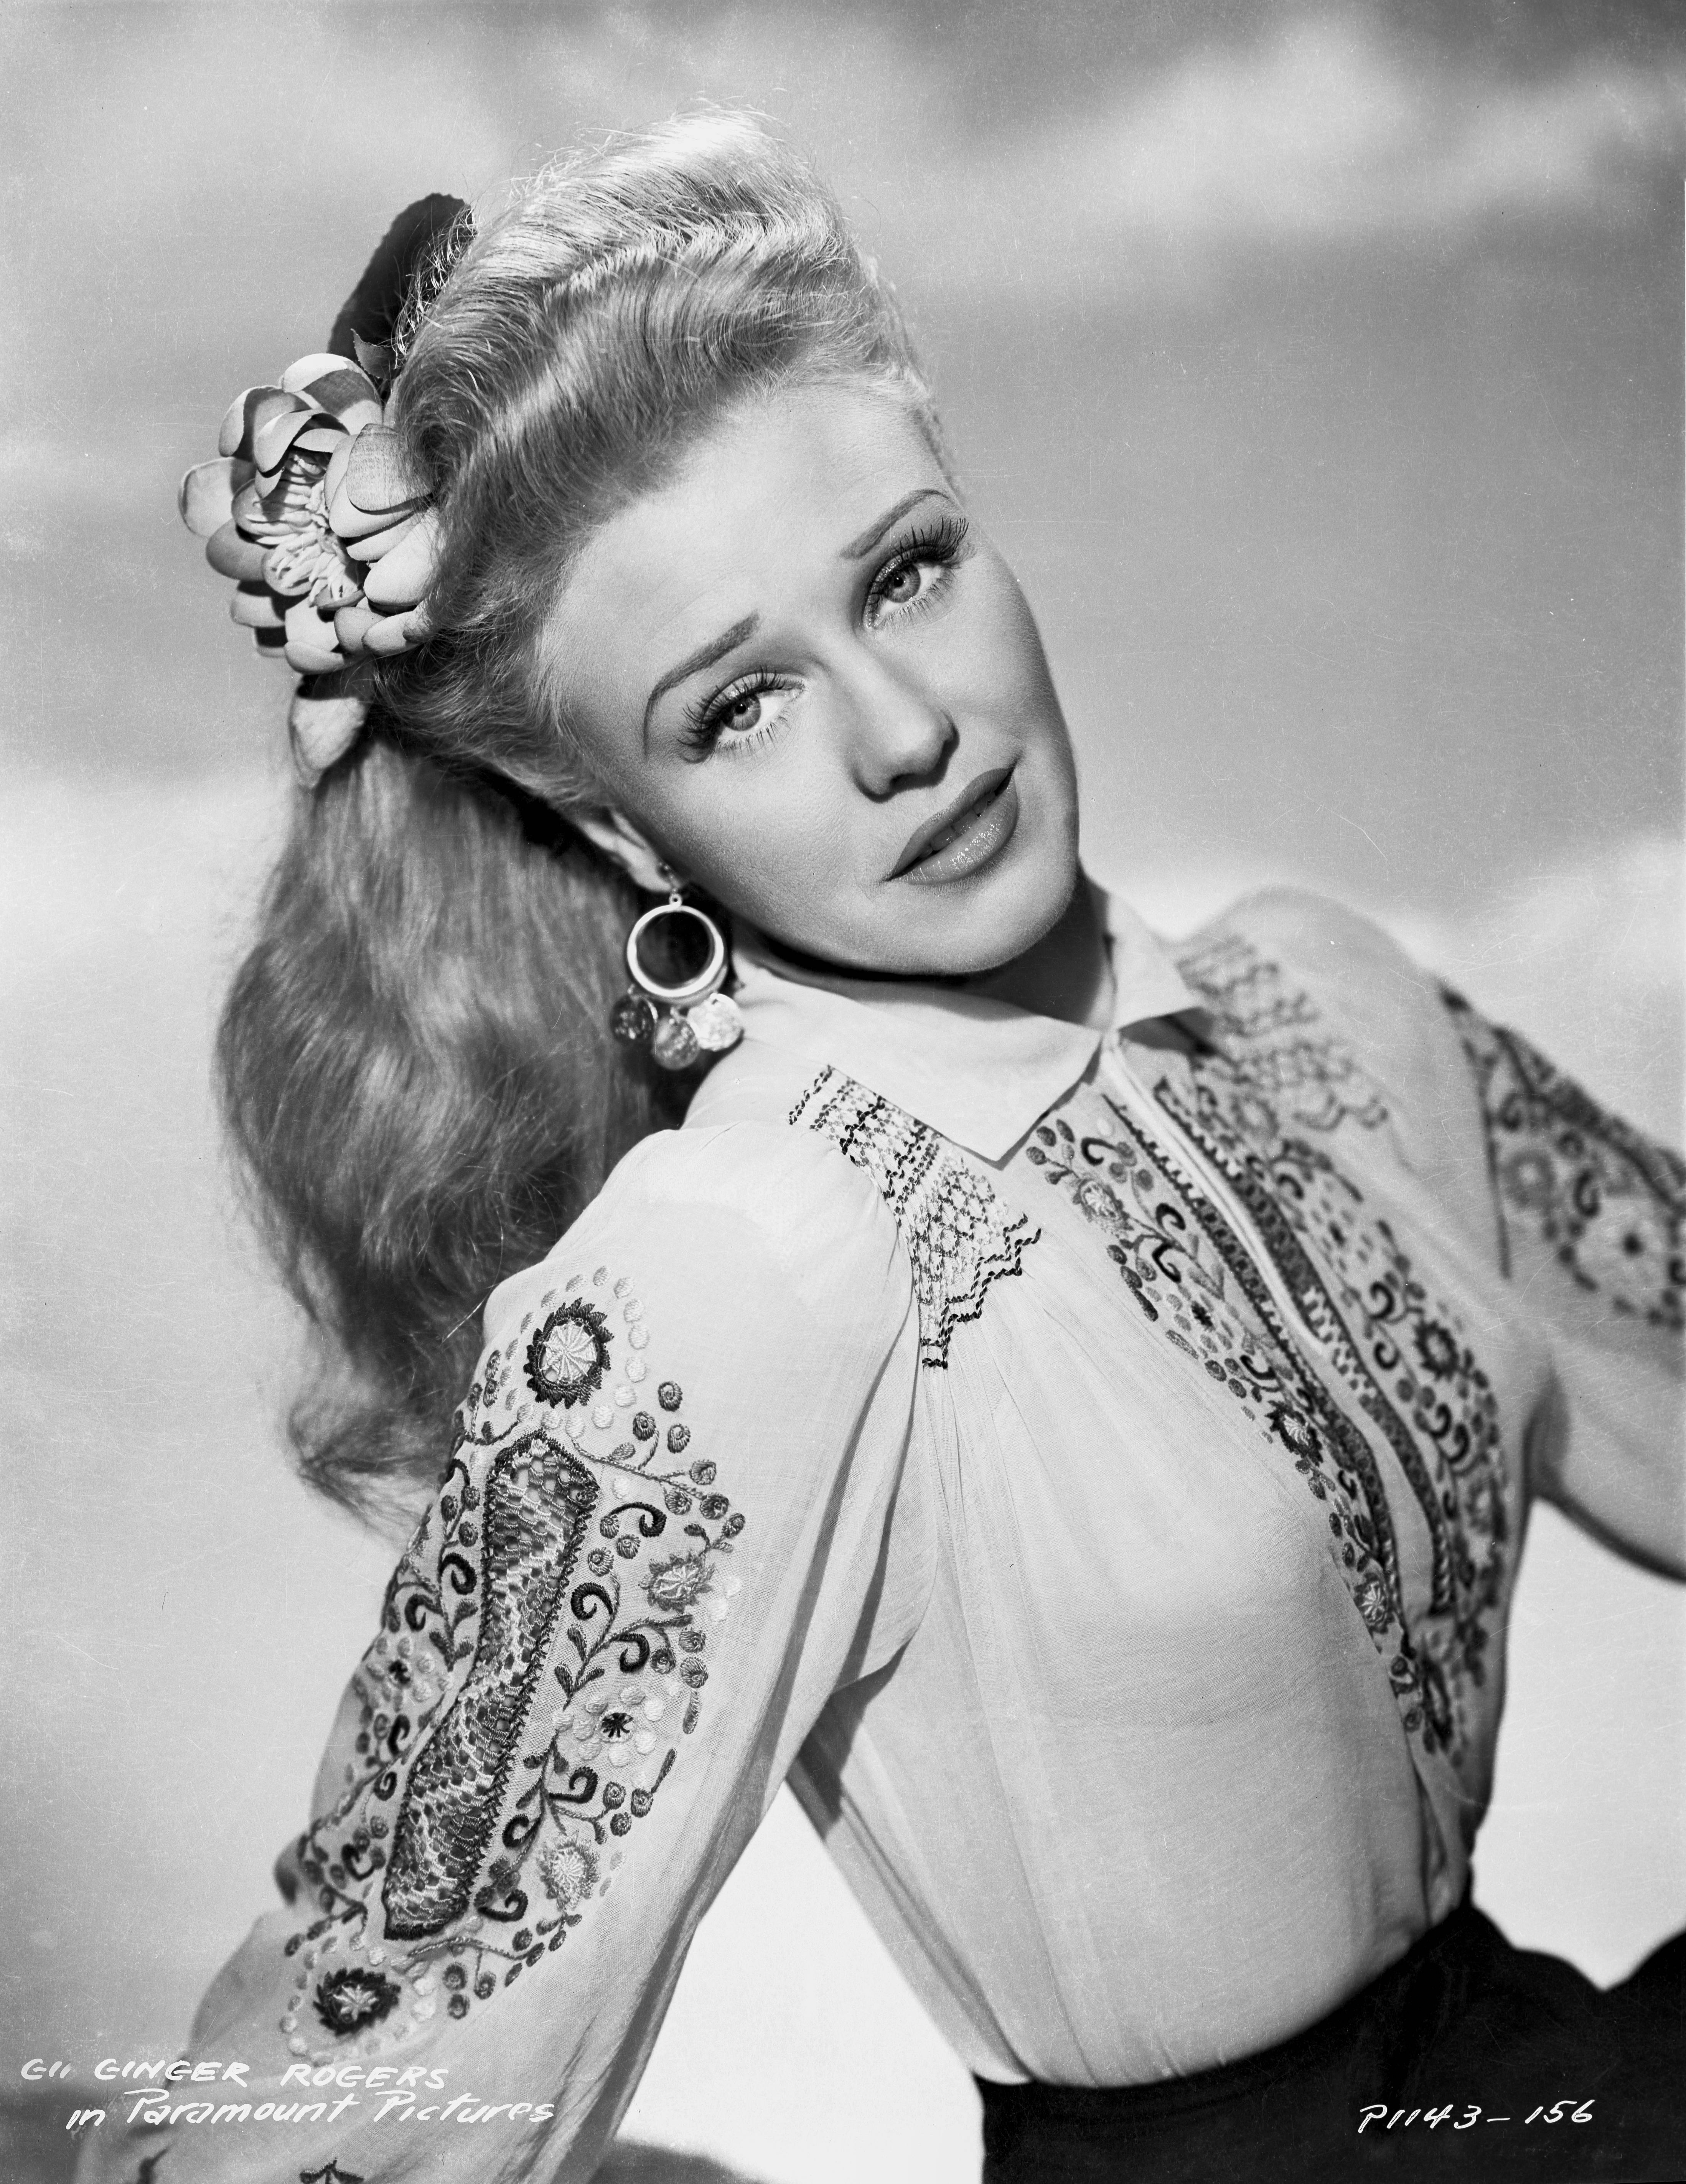 Hal Mcalpin Portrait Photograph - Ginger Rogers, "Lady in the Dark" Fine Art Print